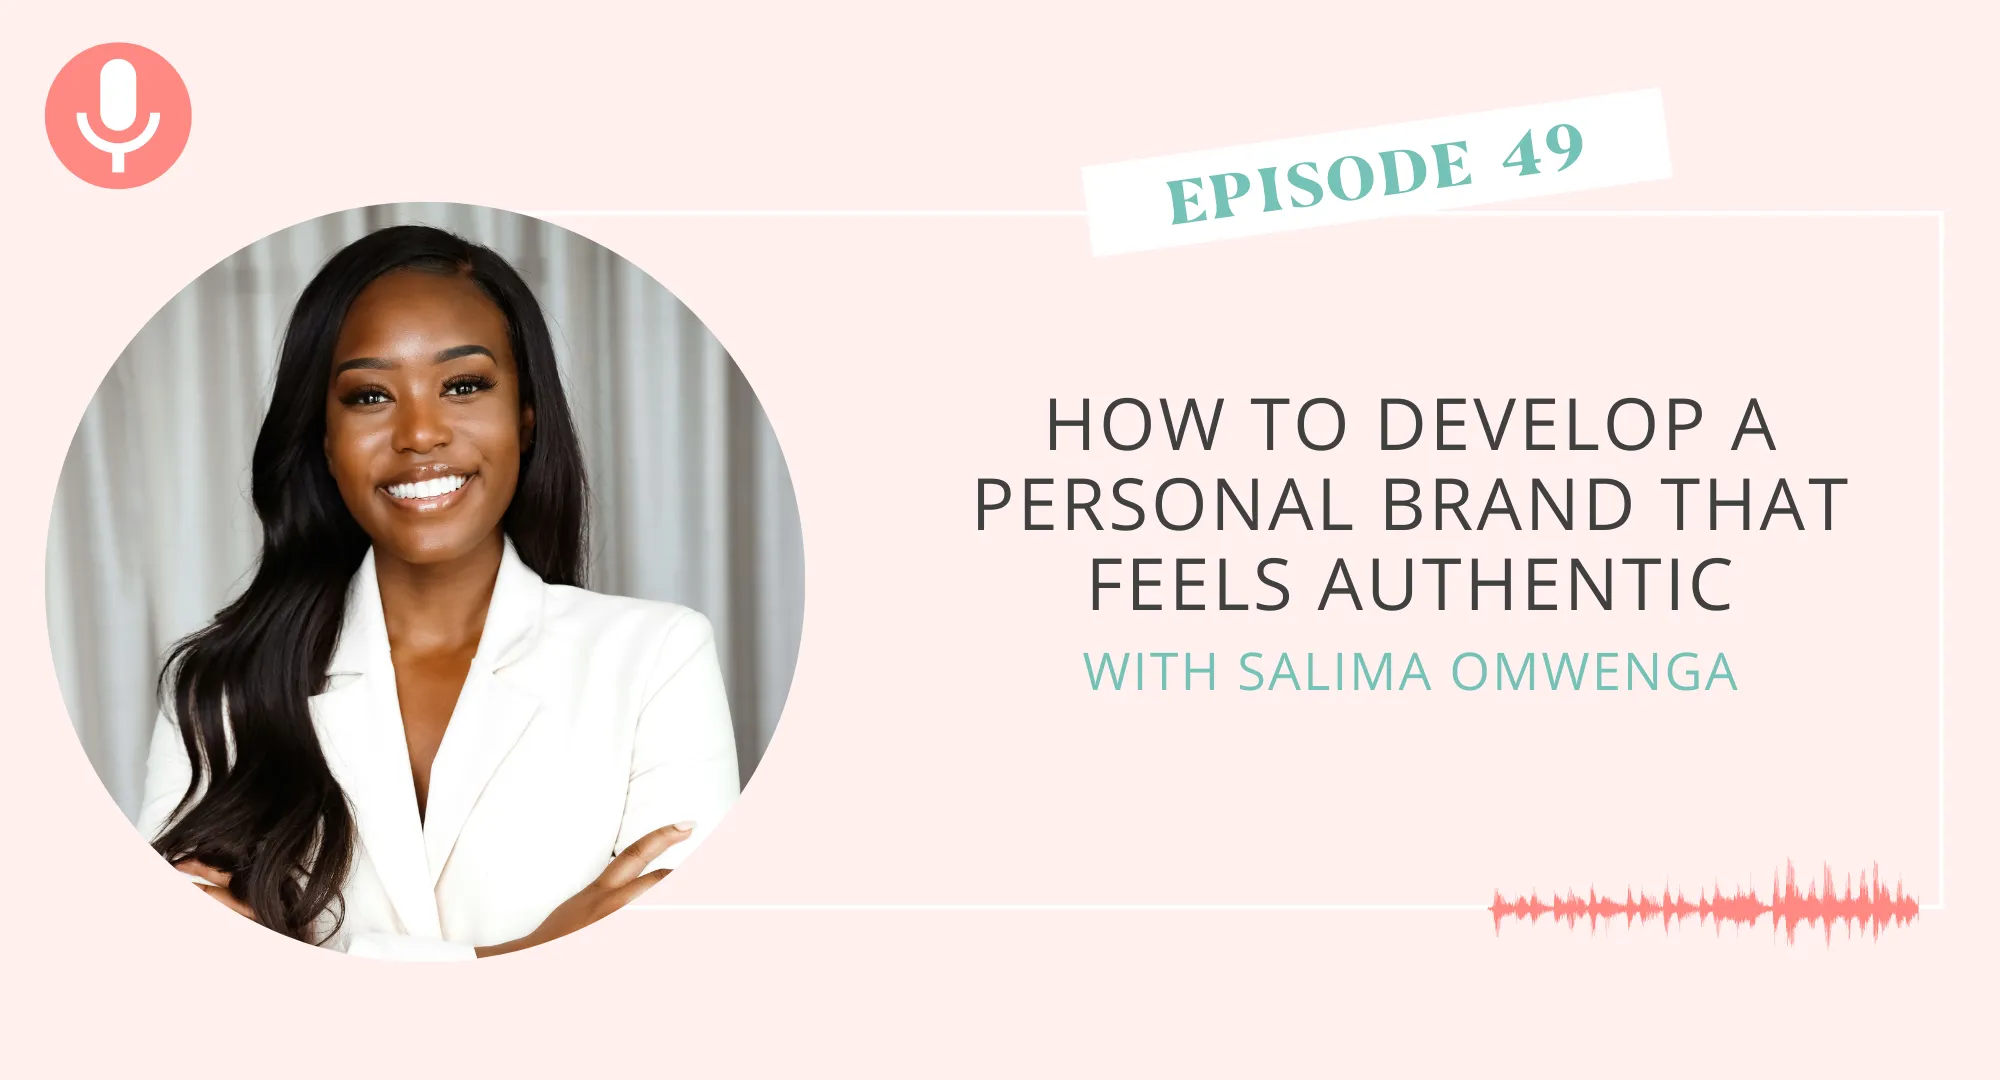 How to Develop a Personal Brand That Feels Authentic with Salima Omwenga